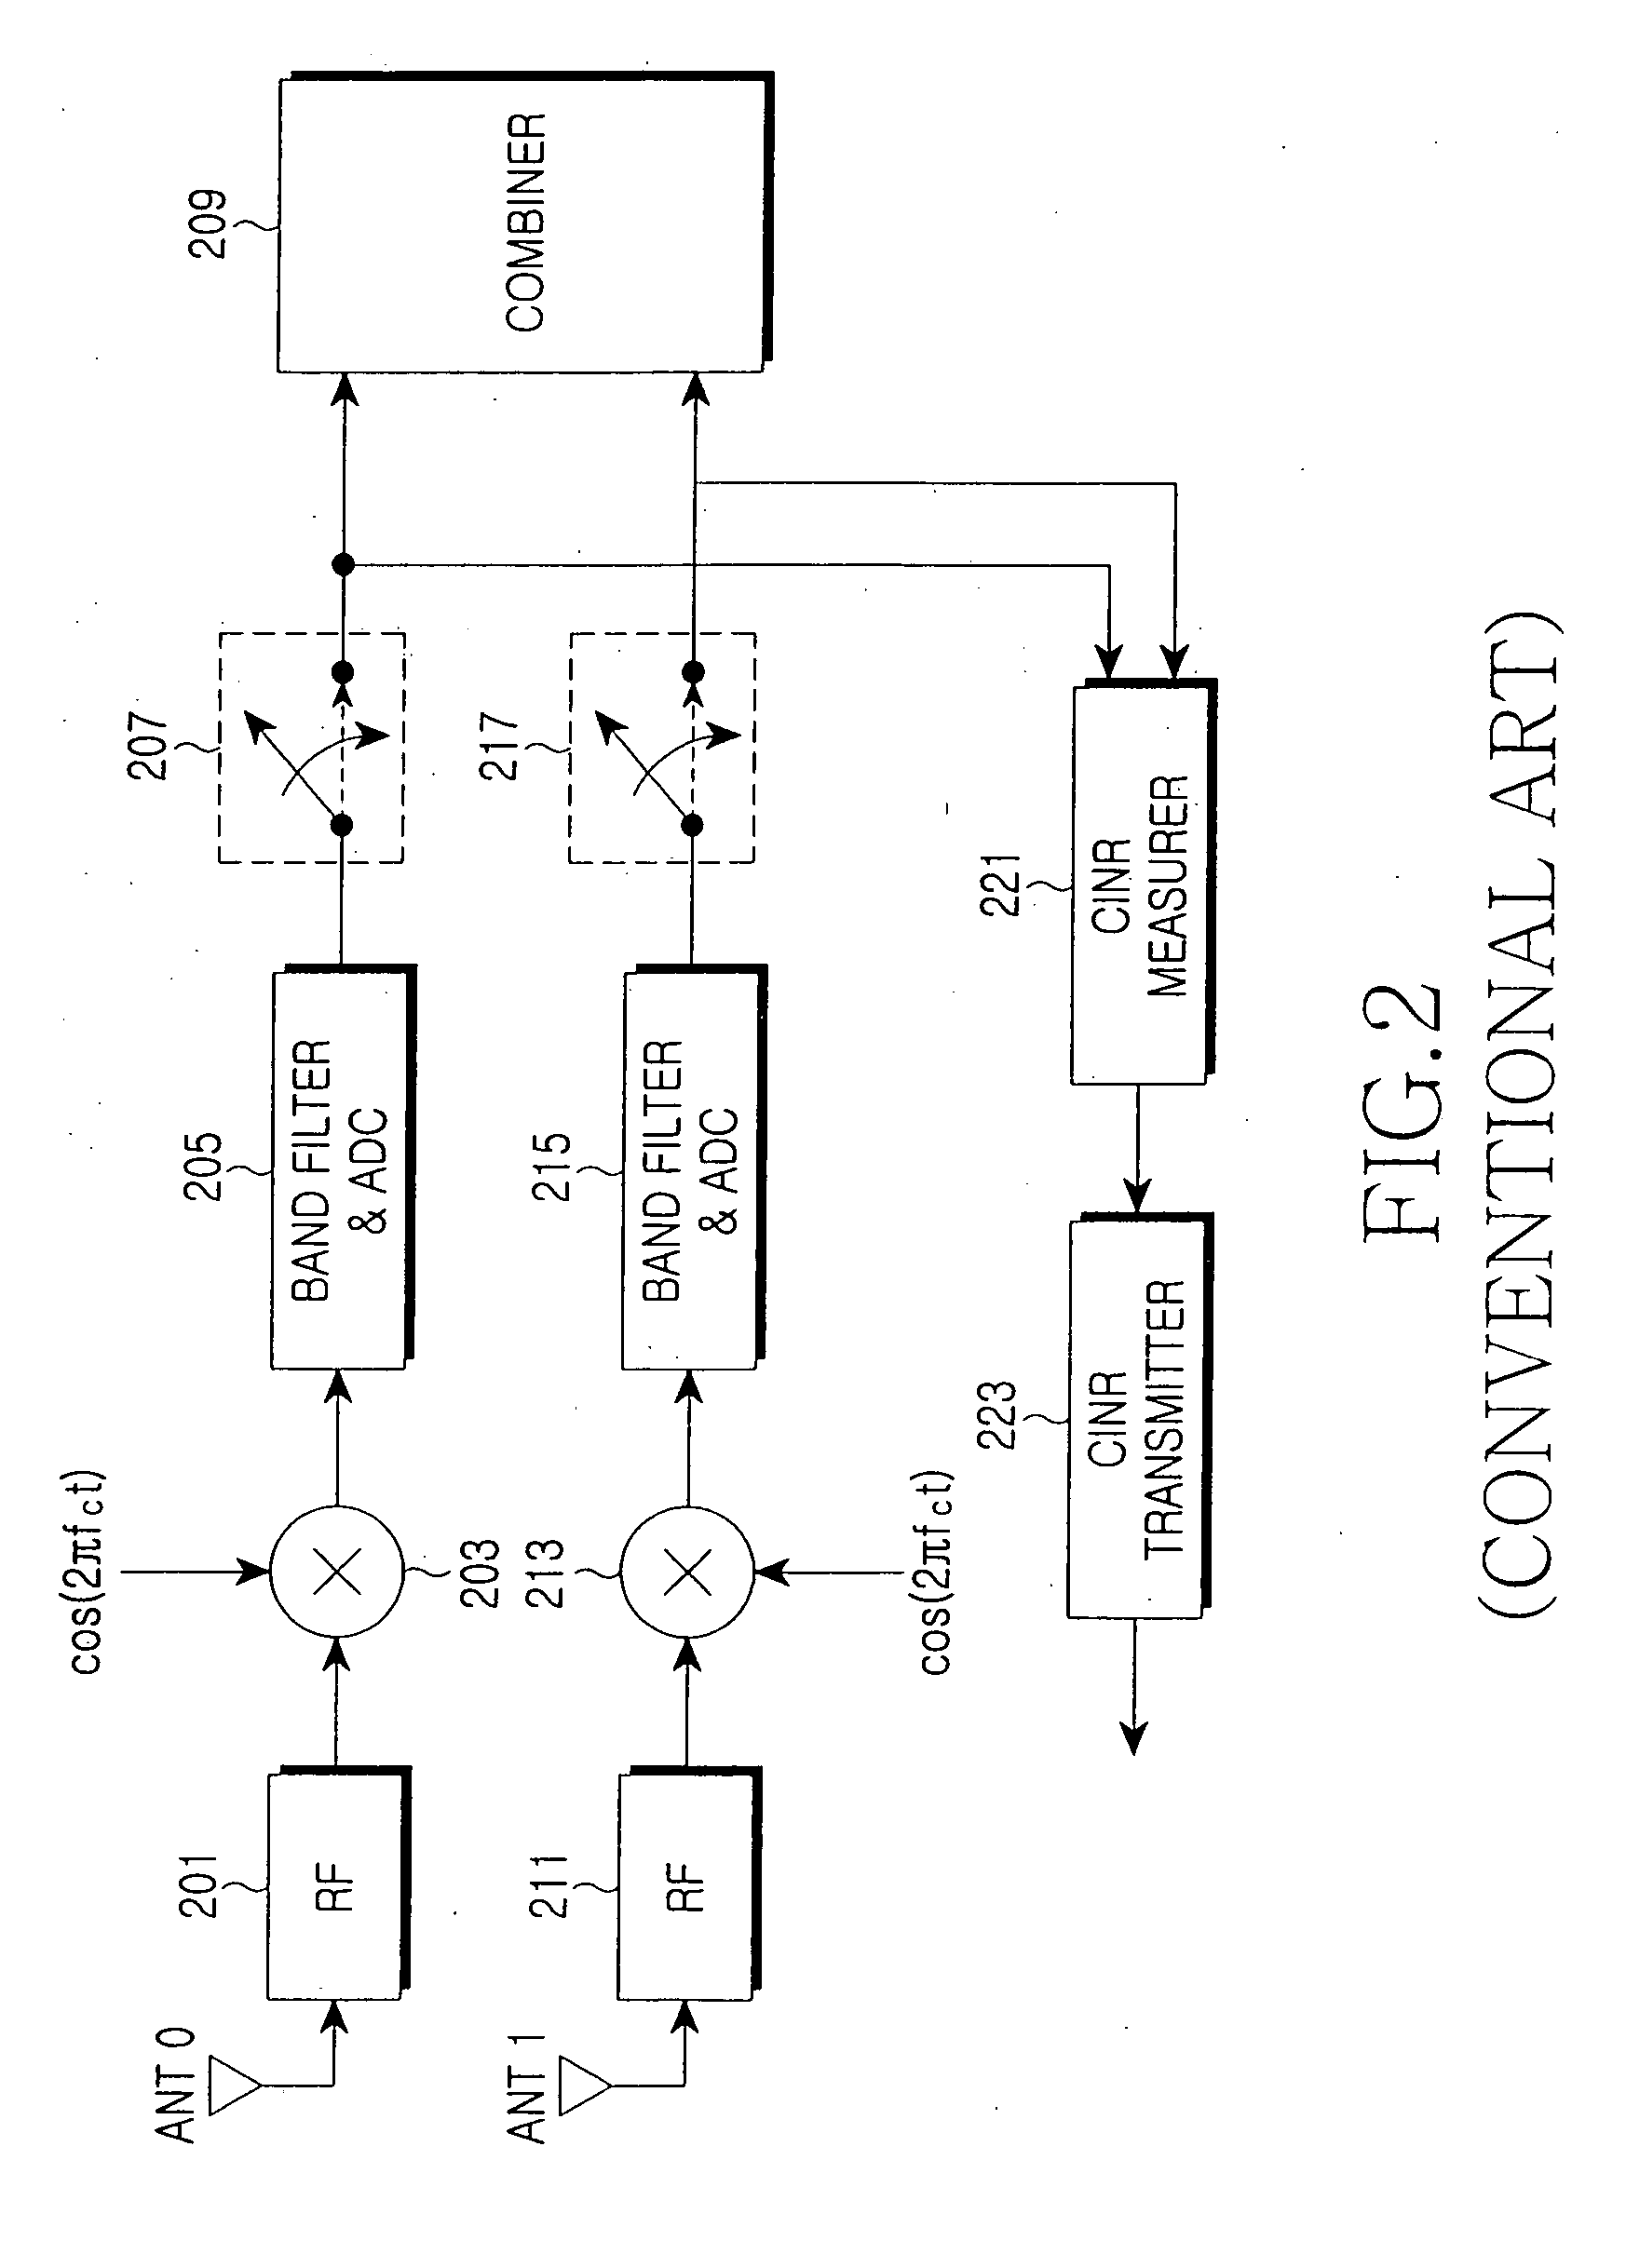 Apparatus and method for estimating and reporting a carrier to interference noise ratio in a multi-antenna system